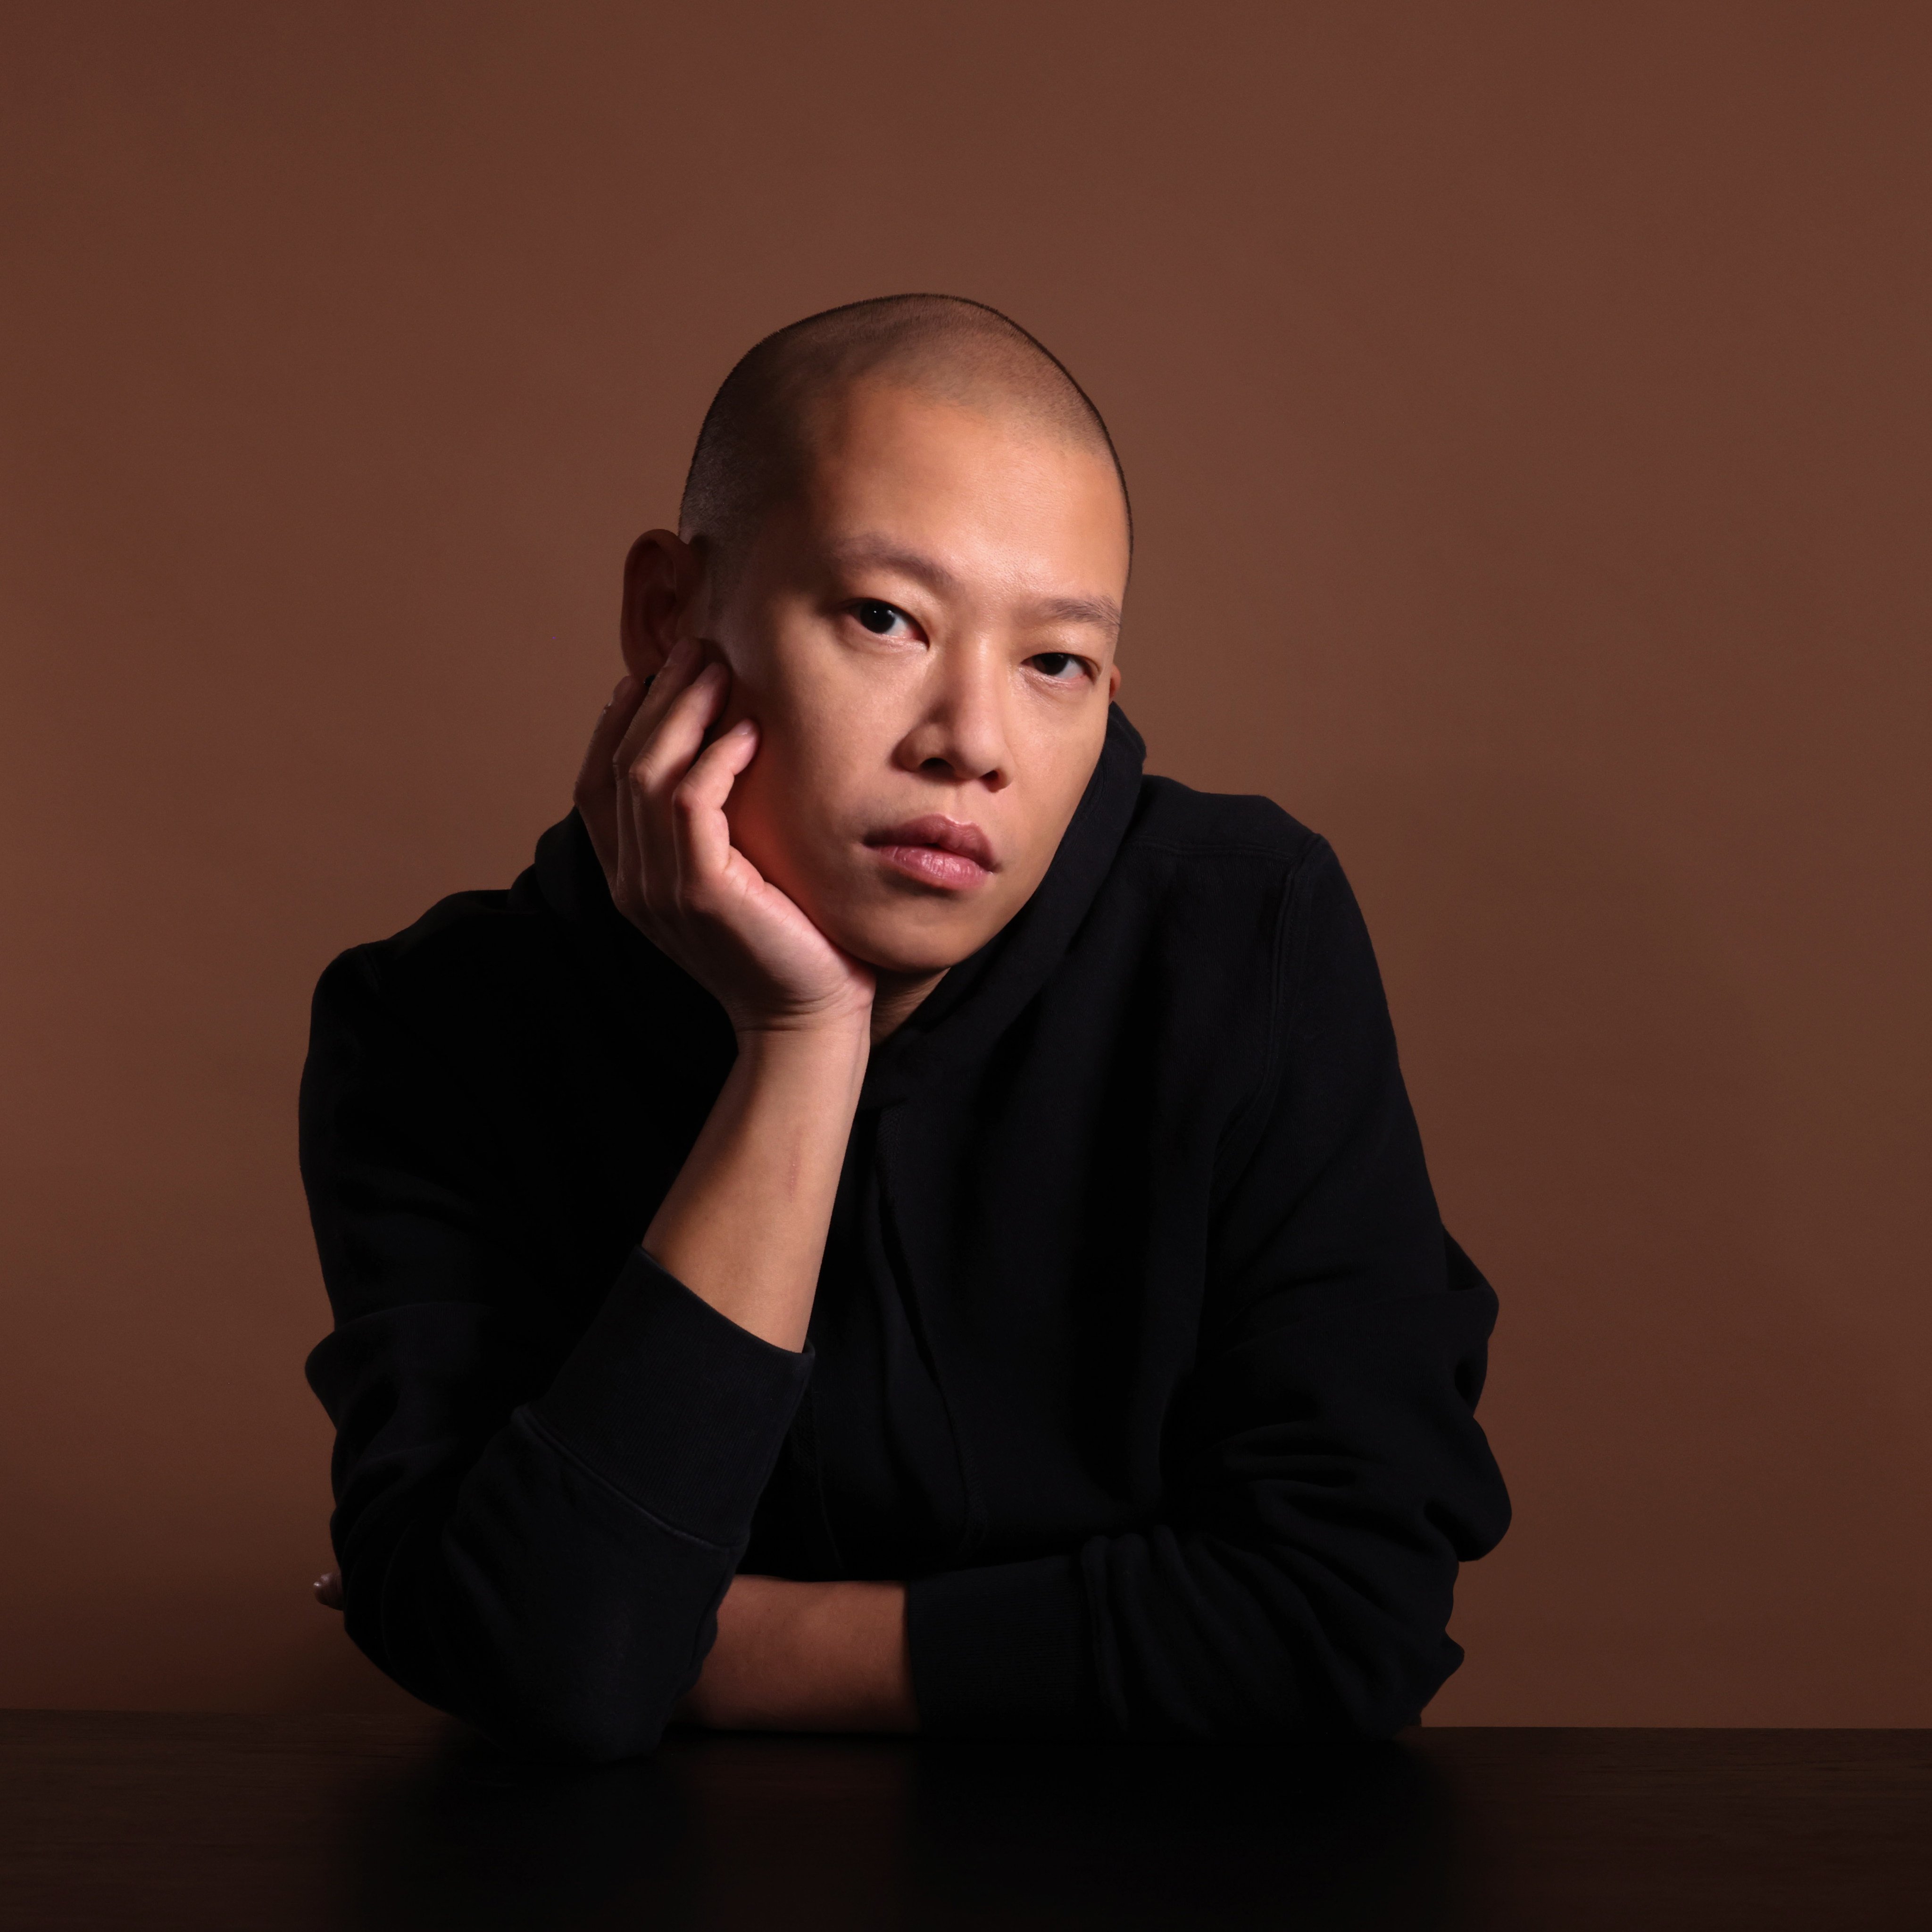 Taiwan-born, New York-based fashion designer Jason Wu made clothes for his Barbie dolls as a child, but after talking his way into the fashion industry, ended up dressing none other than Michelle Obama. Photo: Jayme Thornton